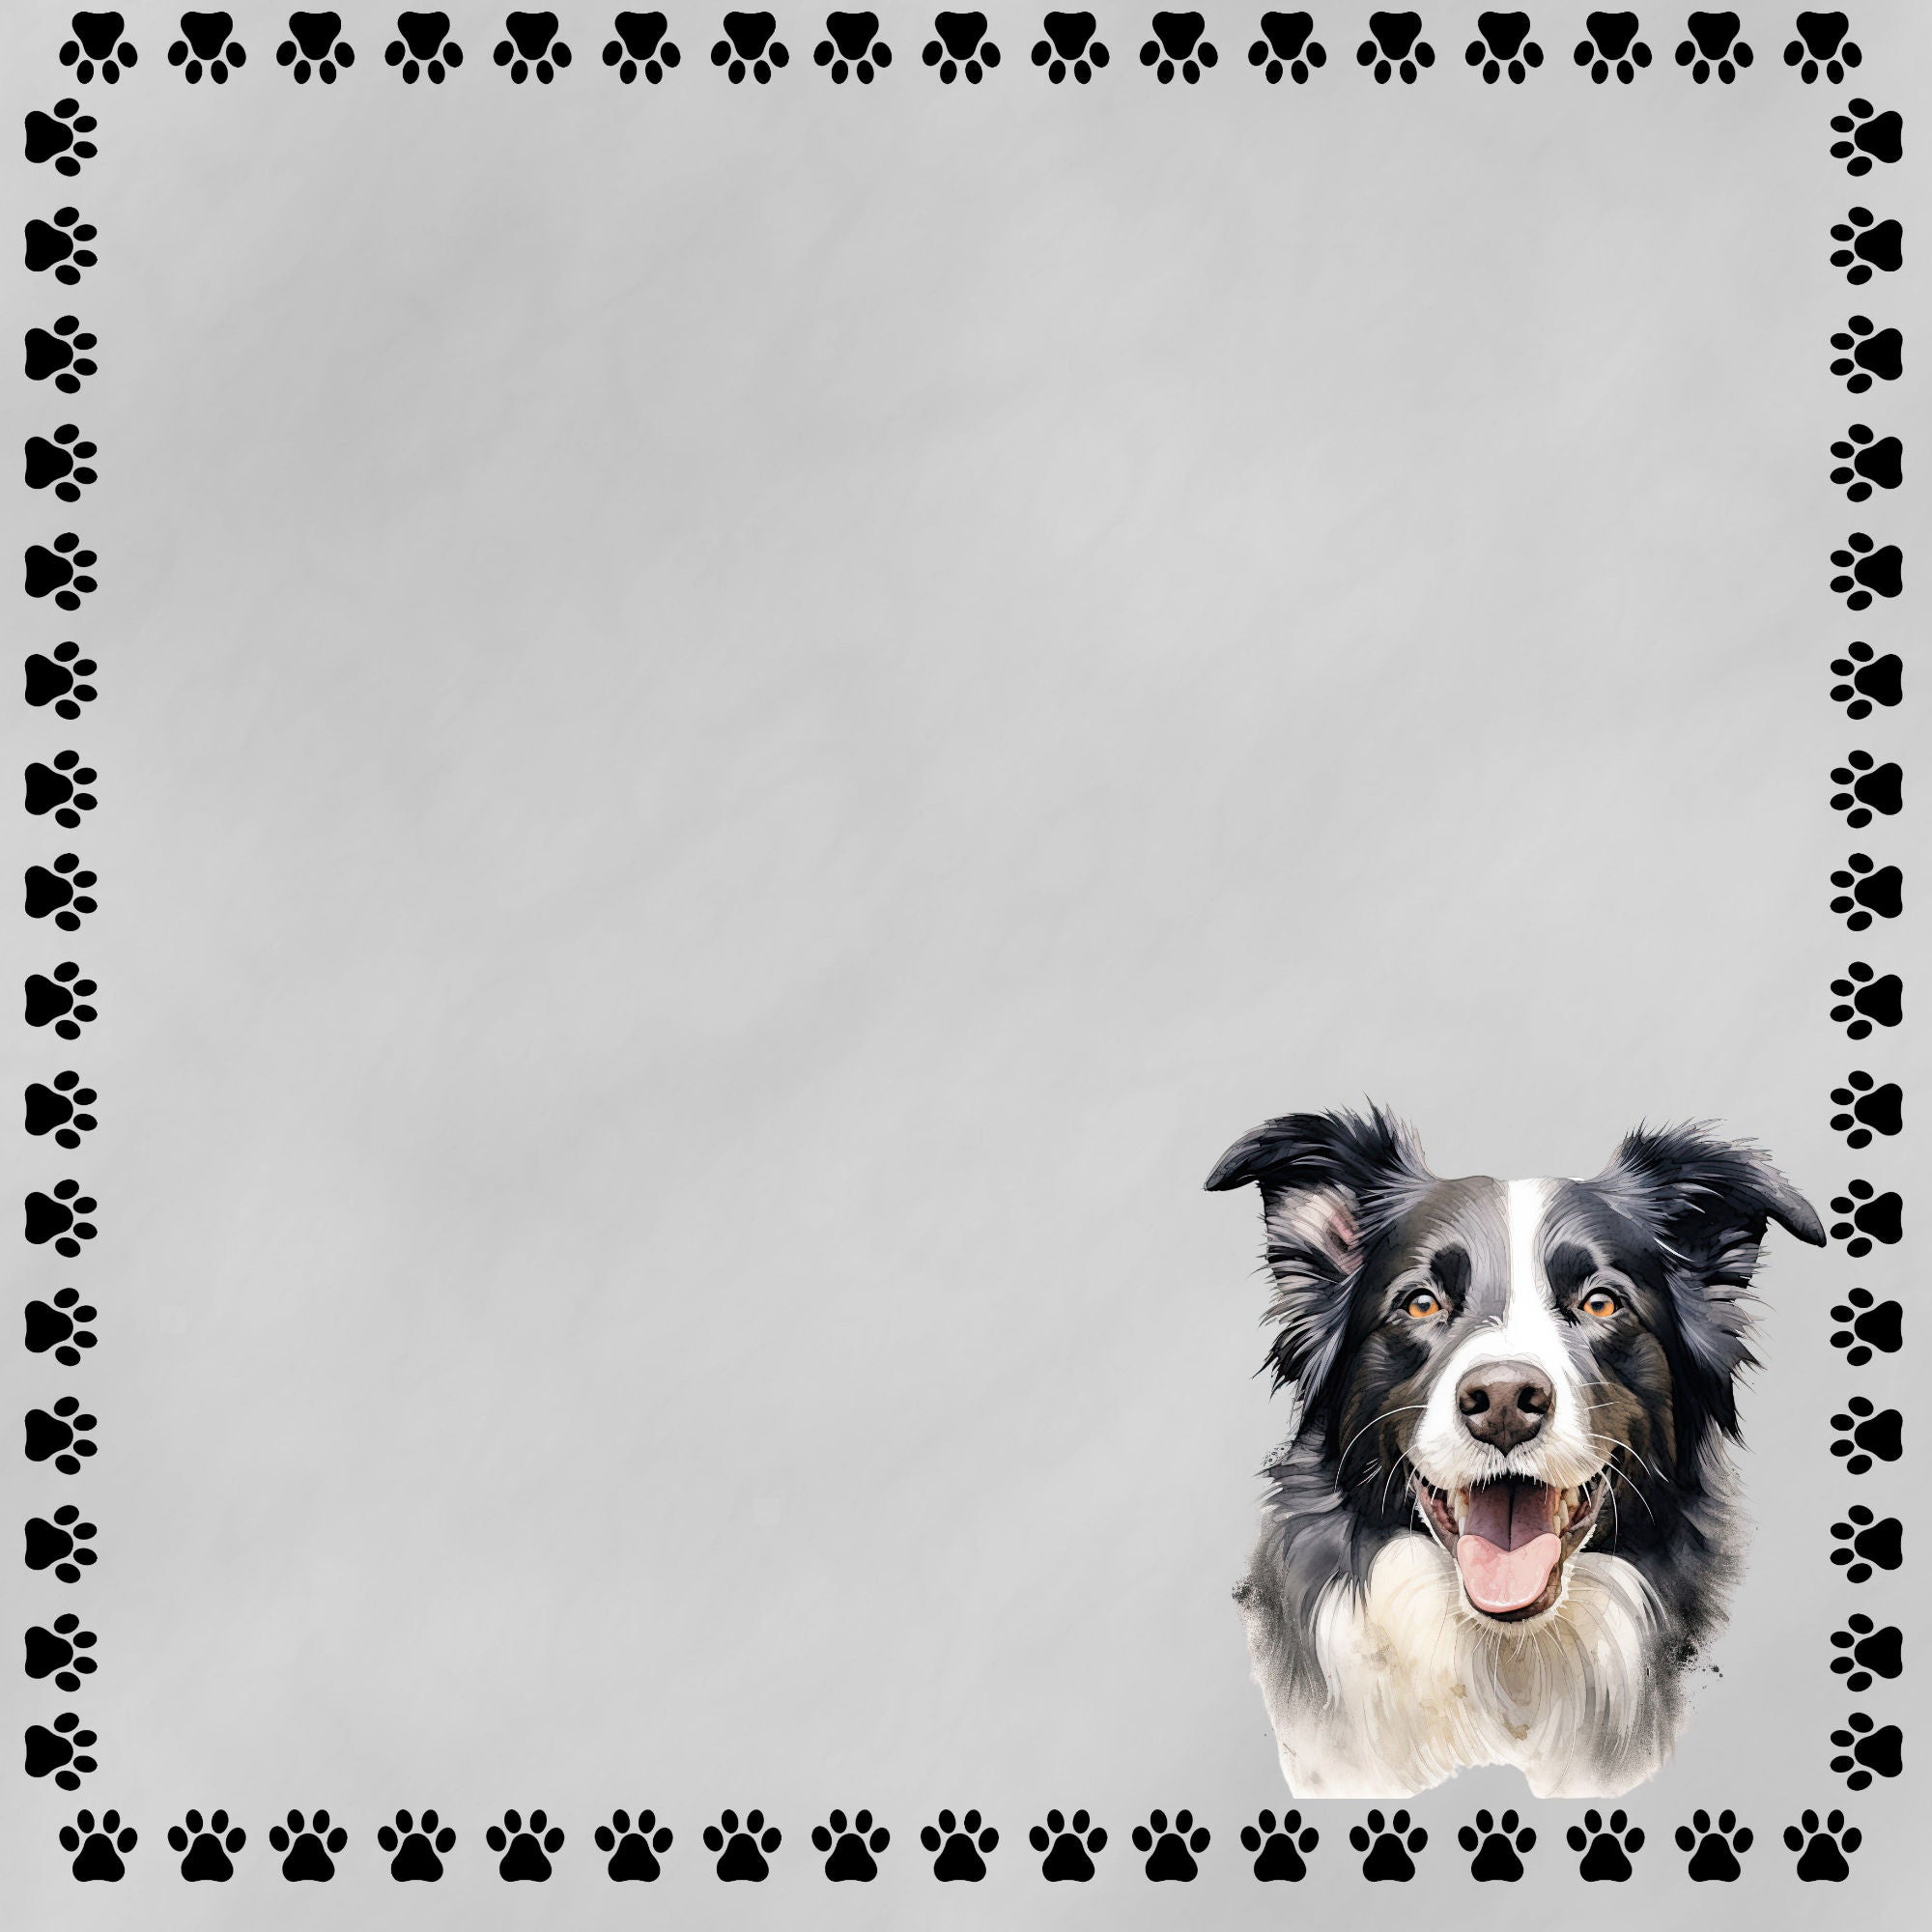 Dog Breeds Collection Border Collie 12 x 12 Double-Sided Scrapbook Paper by SSC Designs